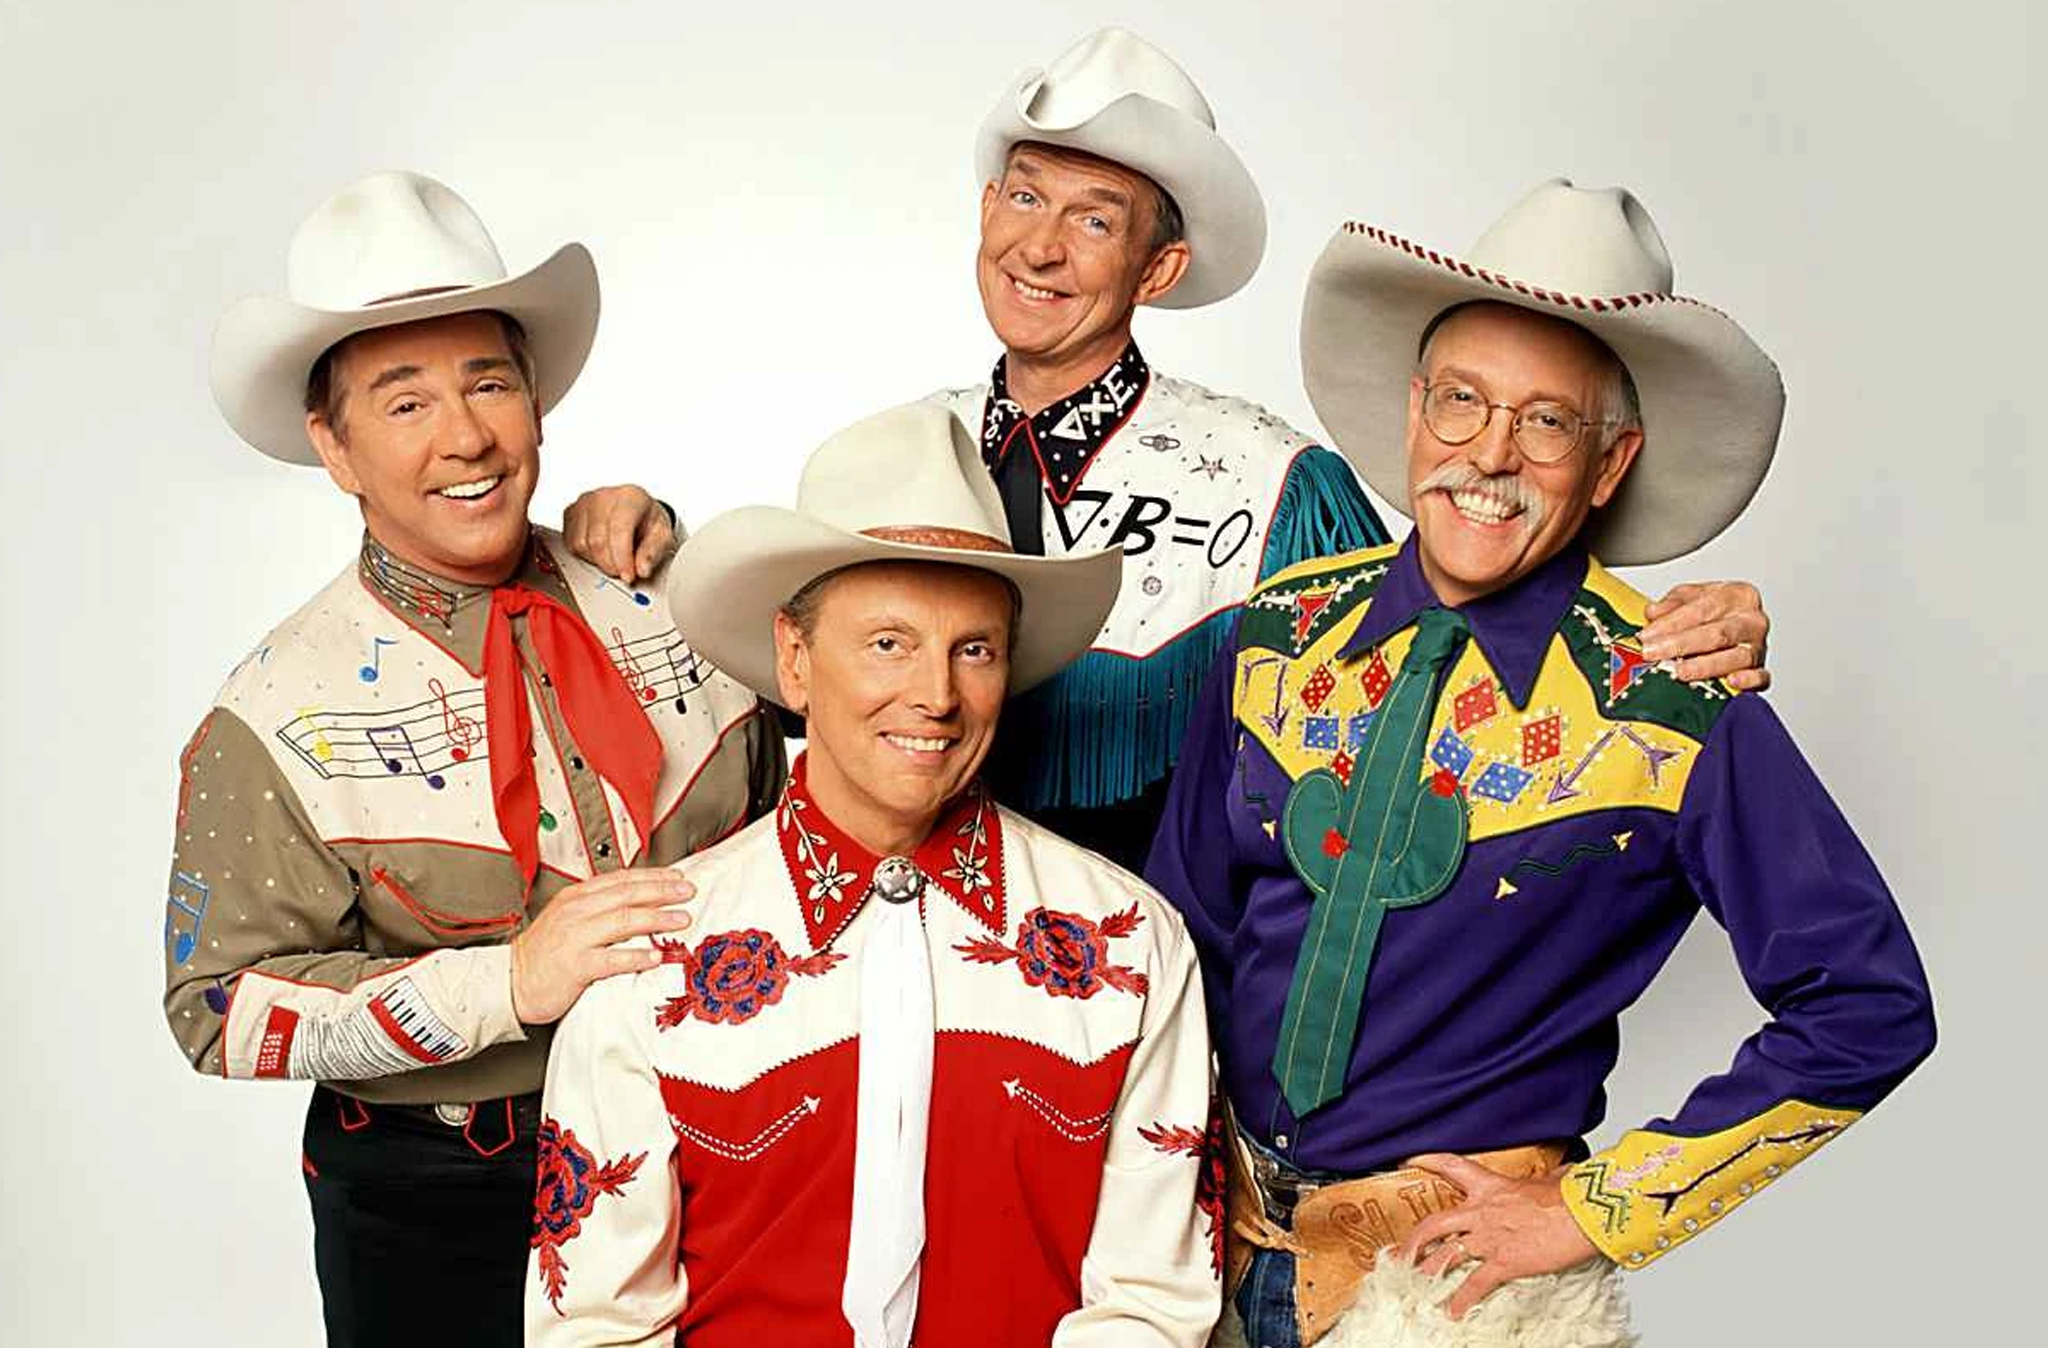 A photo of the band Riders in the Sky. Four men over a plain background wearing cowboy hats and western shirts.